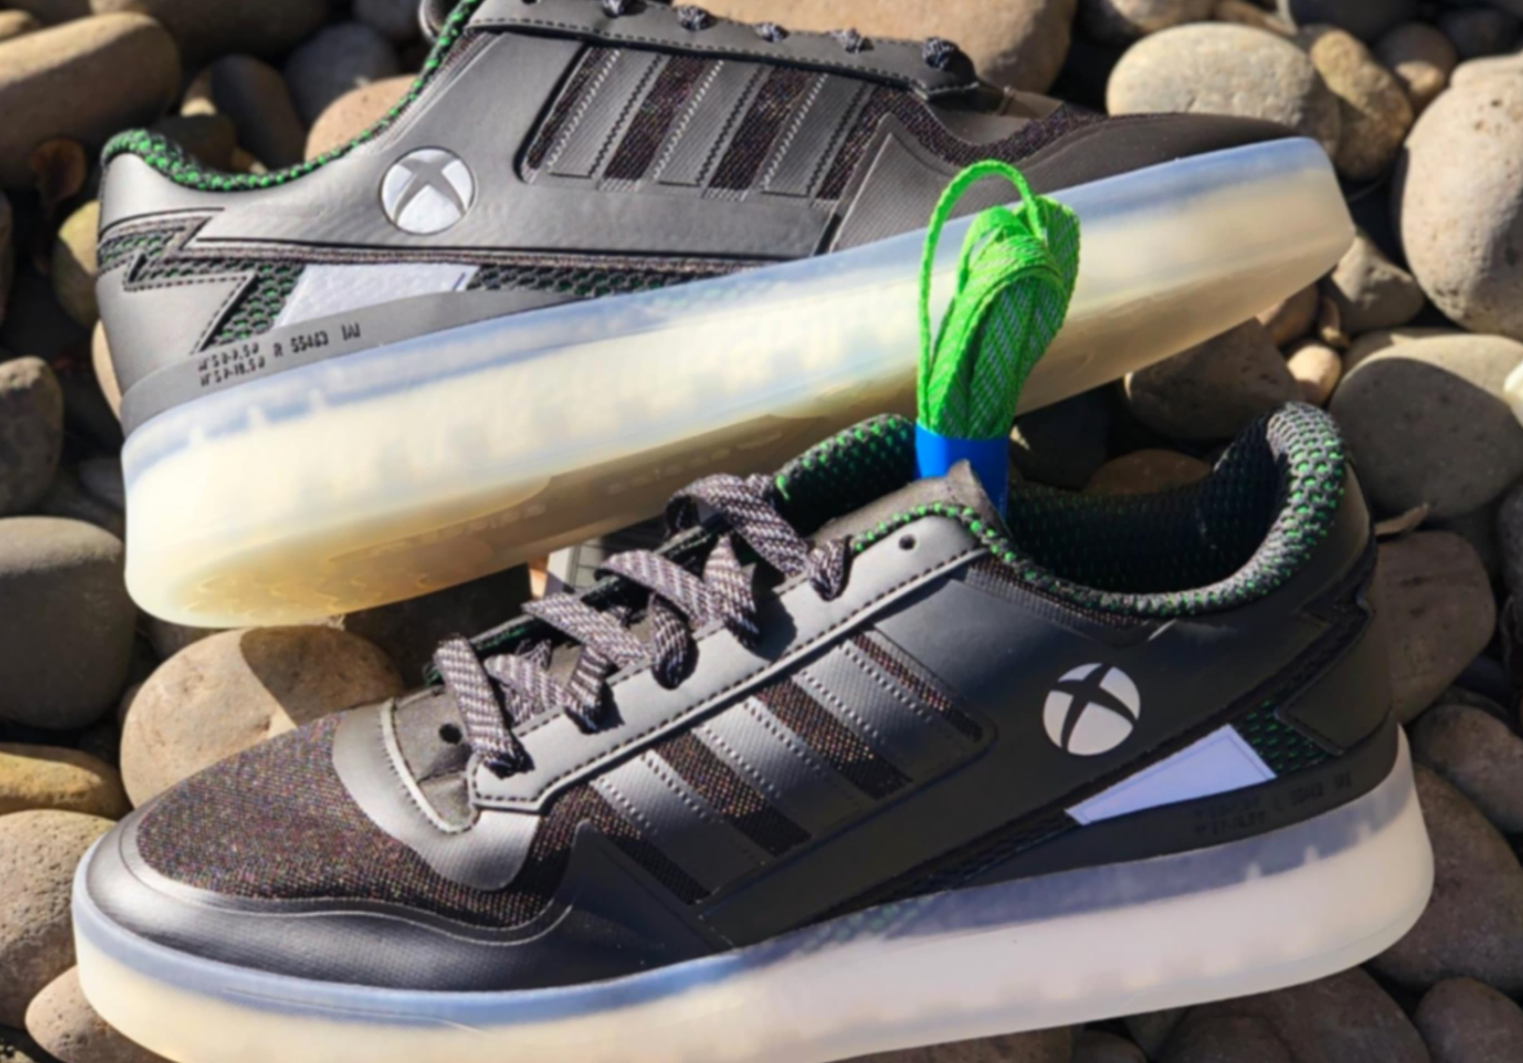 Adidas releases Xbox-themed sneaker collection